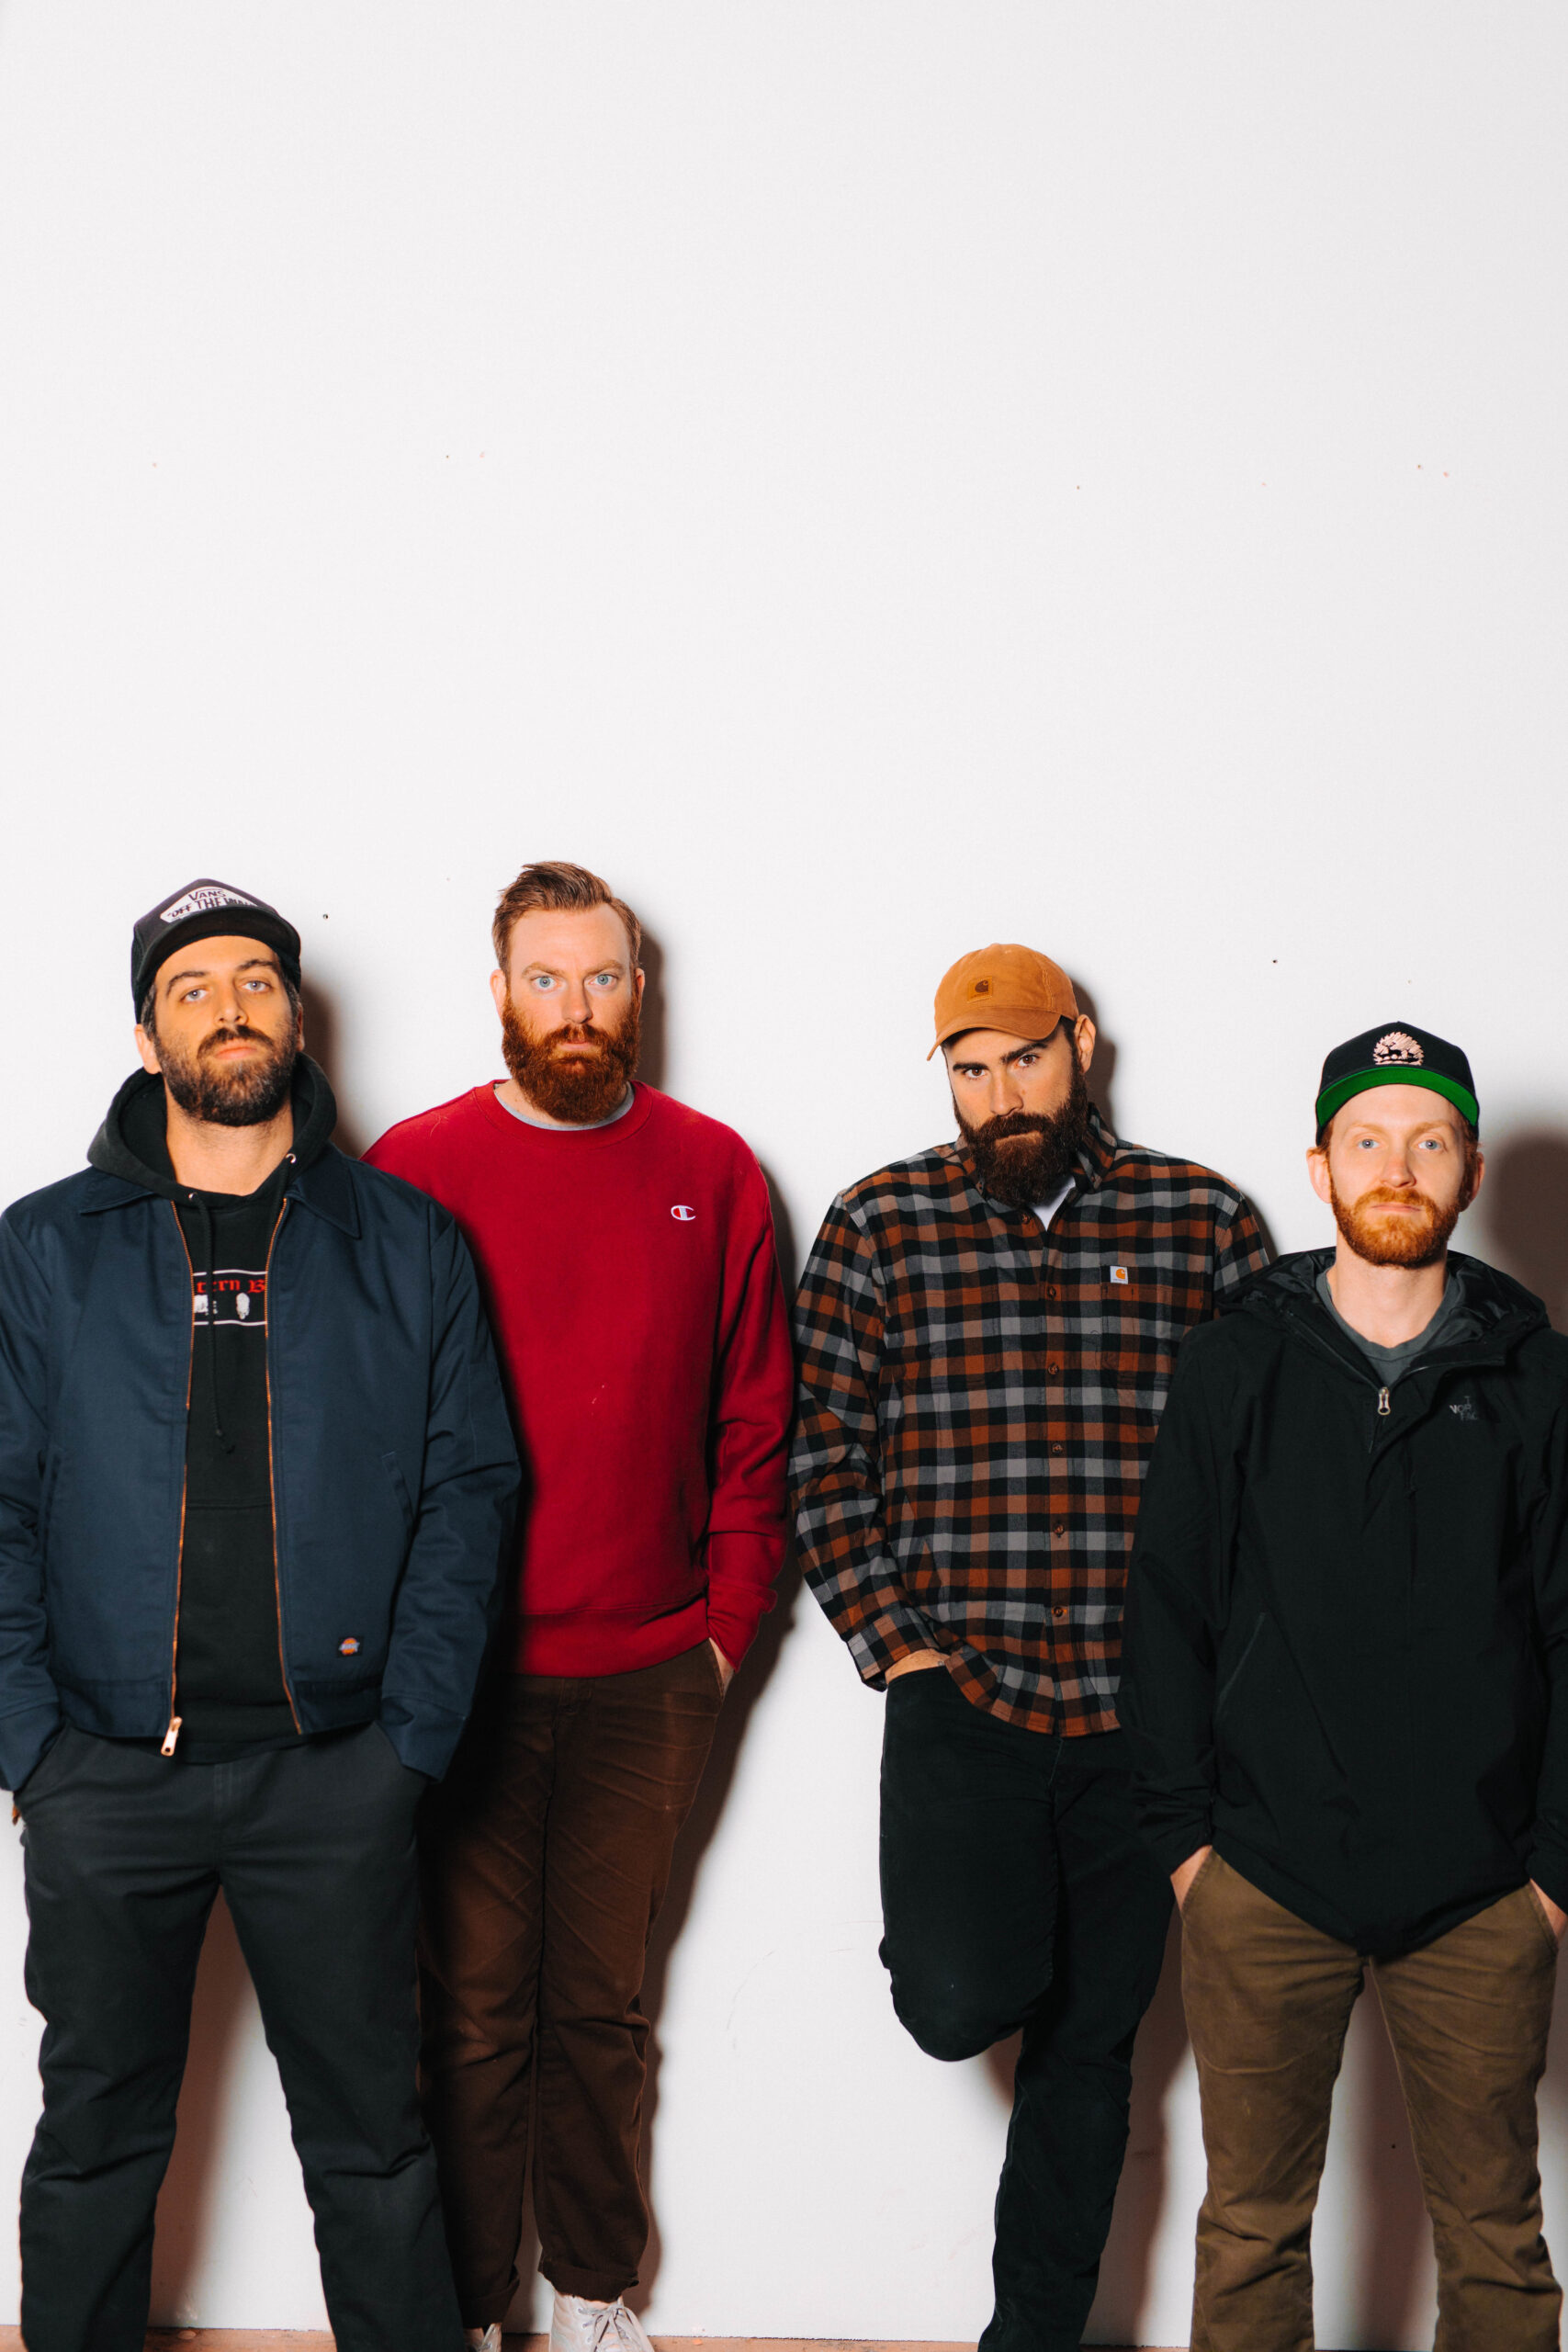 FOUR YEAR STRONG ANNOUNCES NEW ALBUM ‘BRAIN PAIN’ DUE OUT FEBRUARY 28